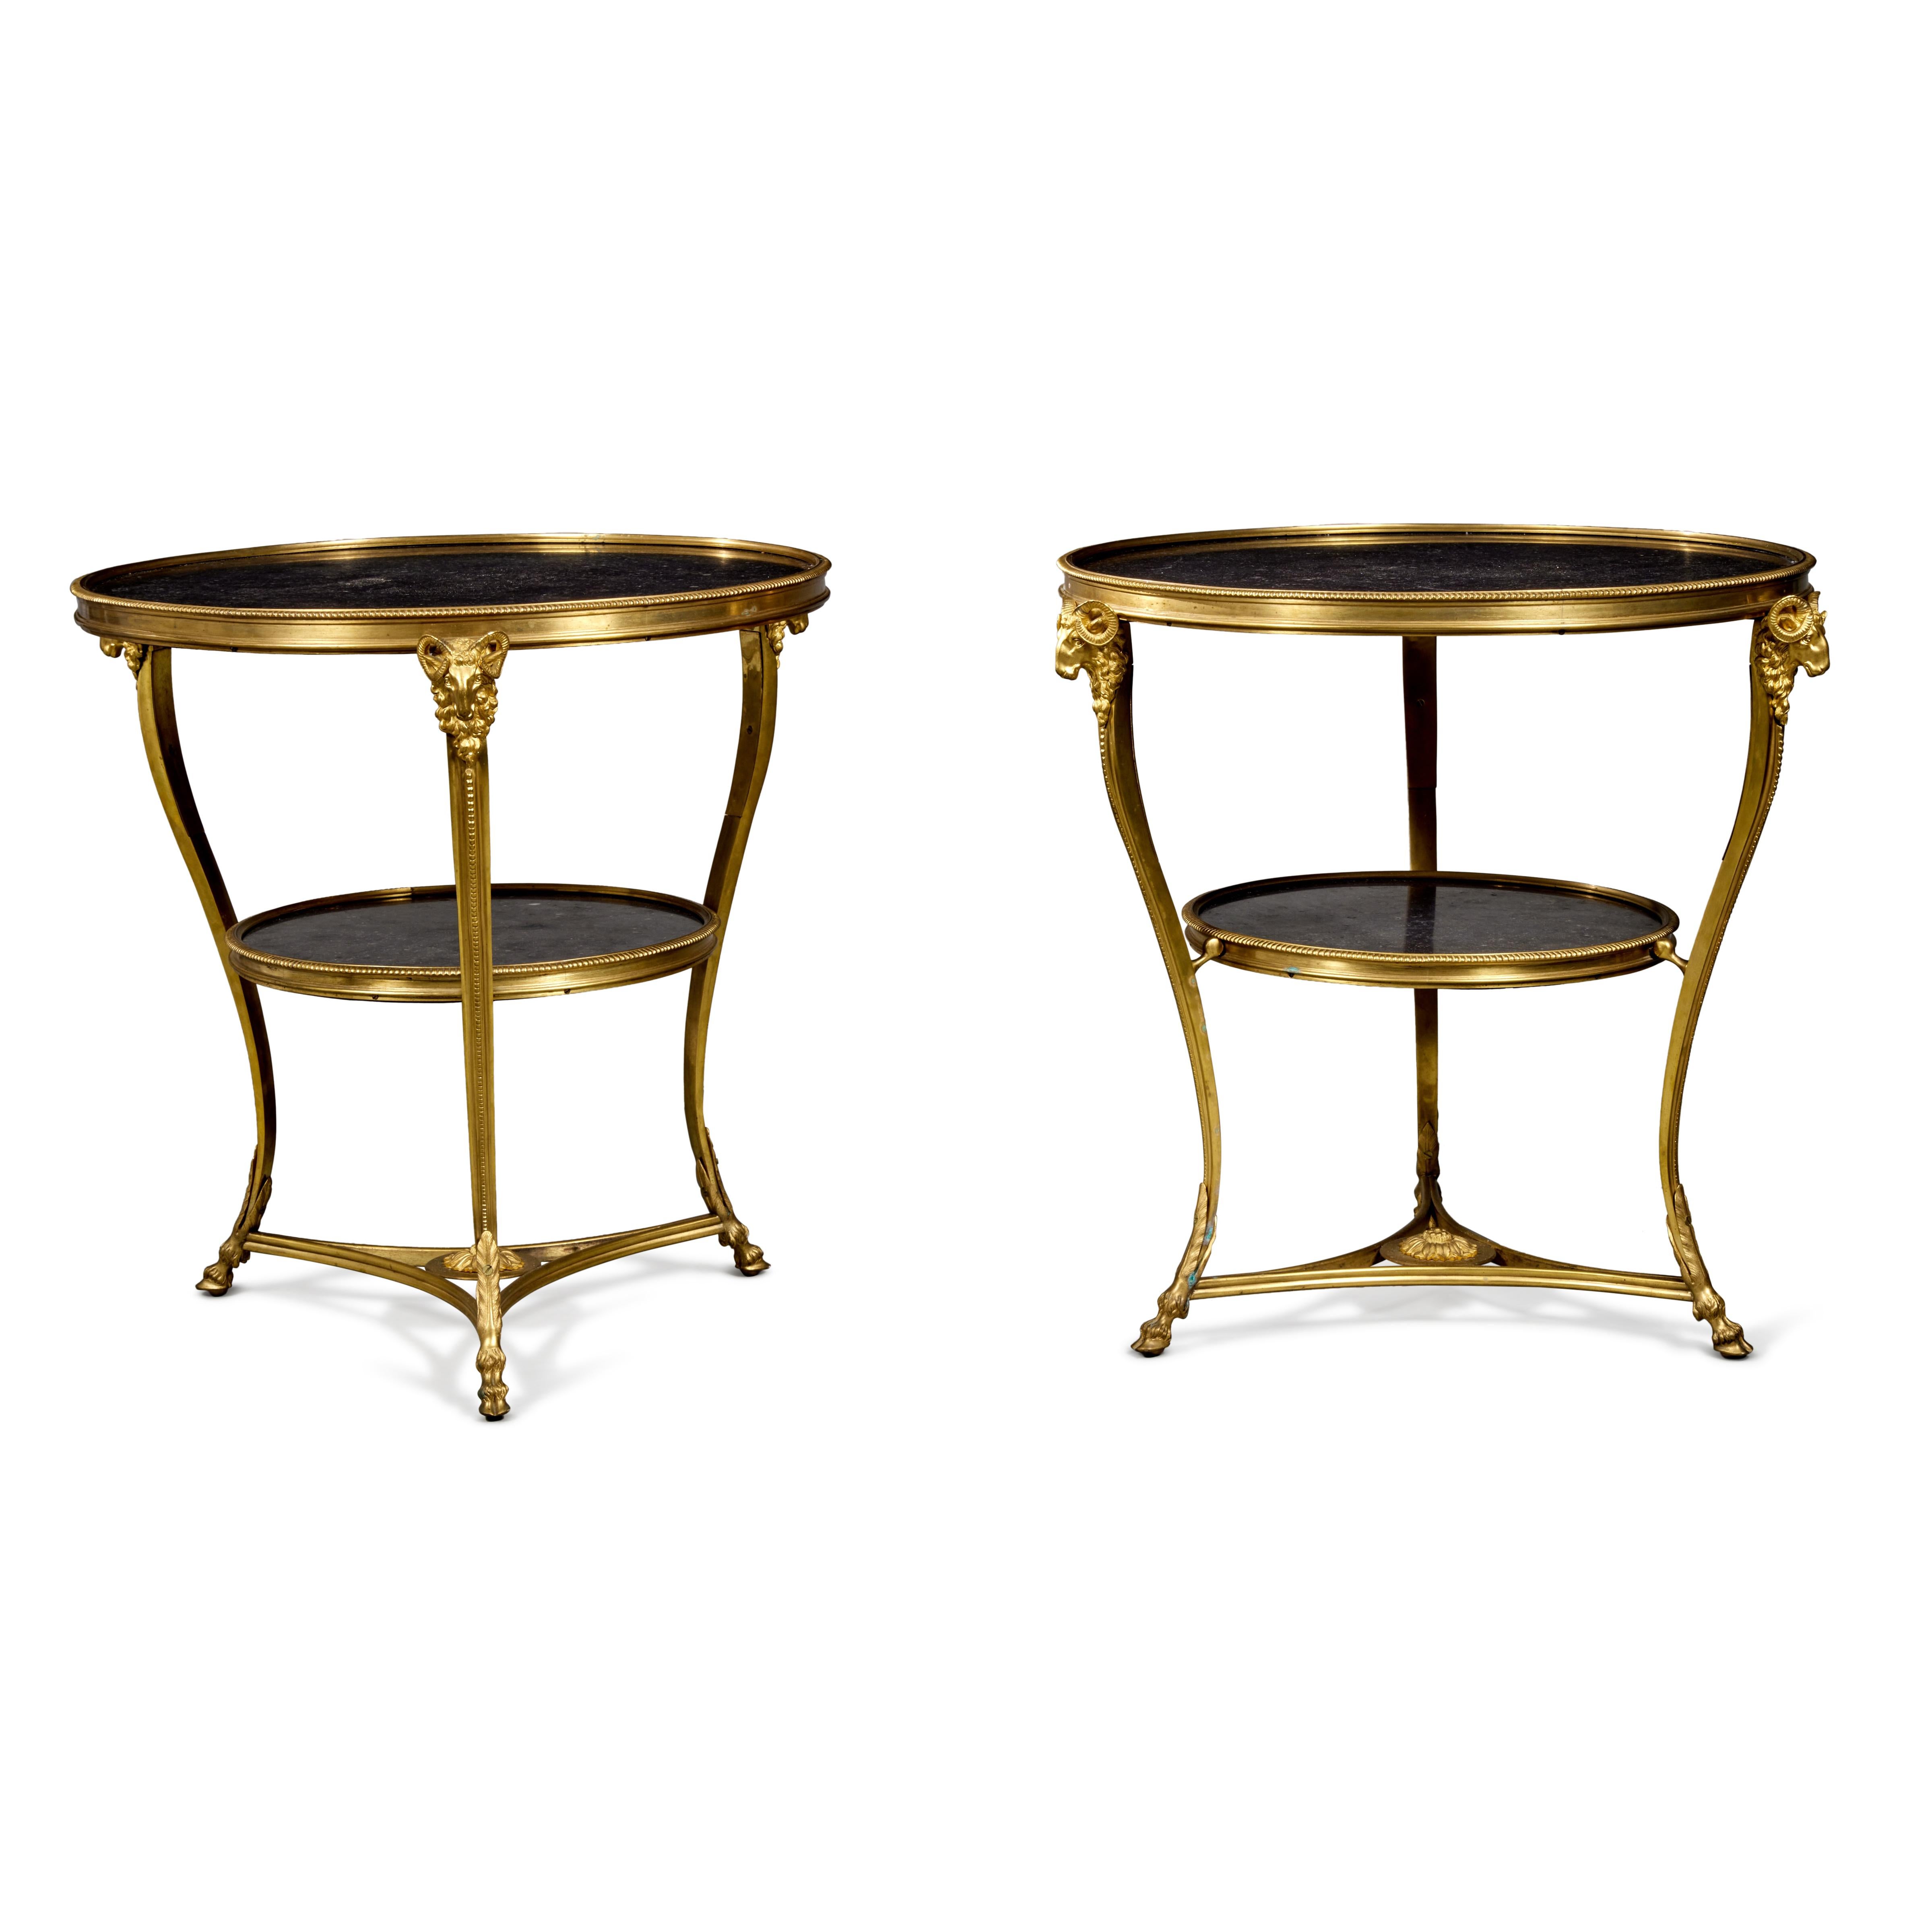 Hand-Carved Pair of Directoire Style Gilt Bronze and Black Marble Gueridons For Sale